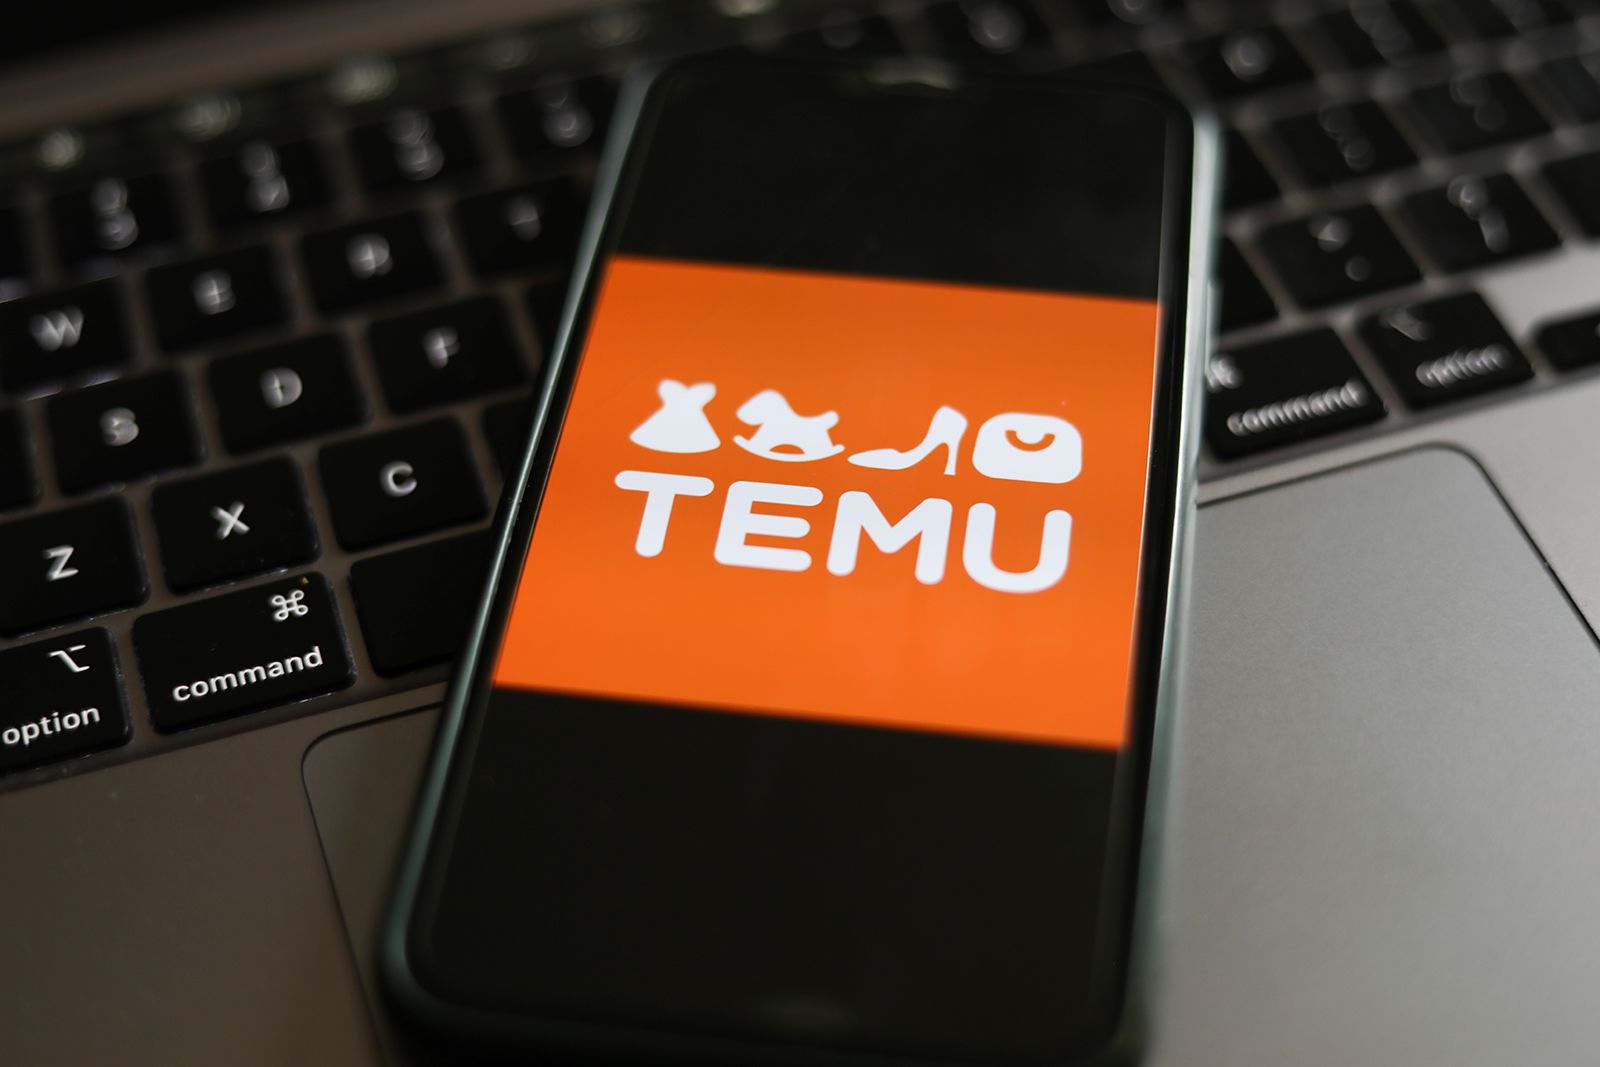 Temu, the online superstore, expands to Europe after conquering the US